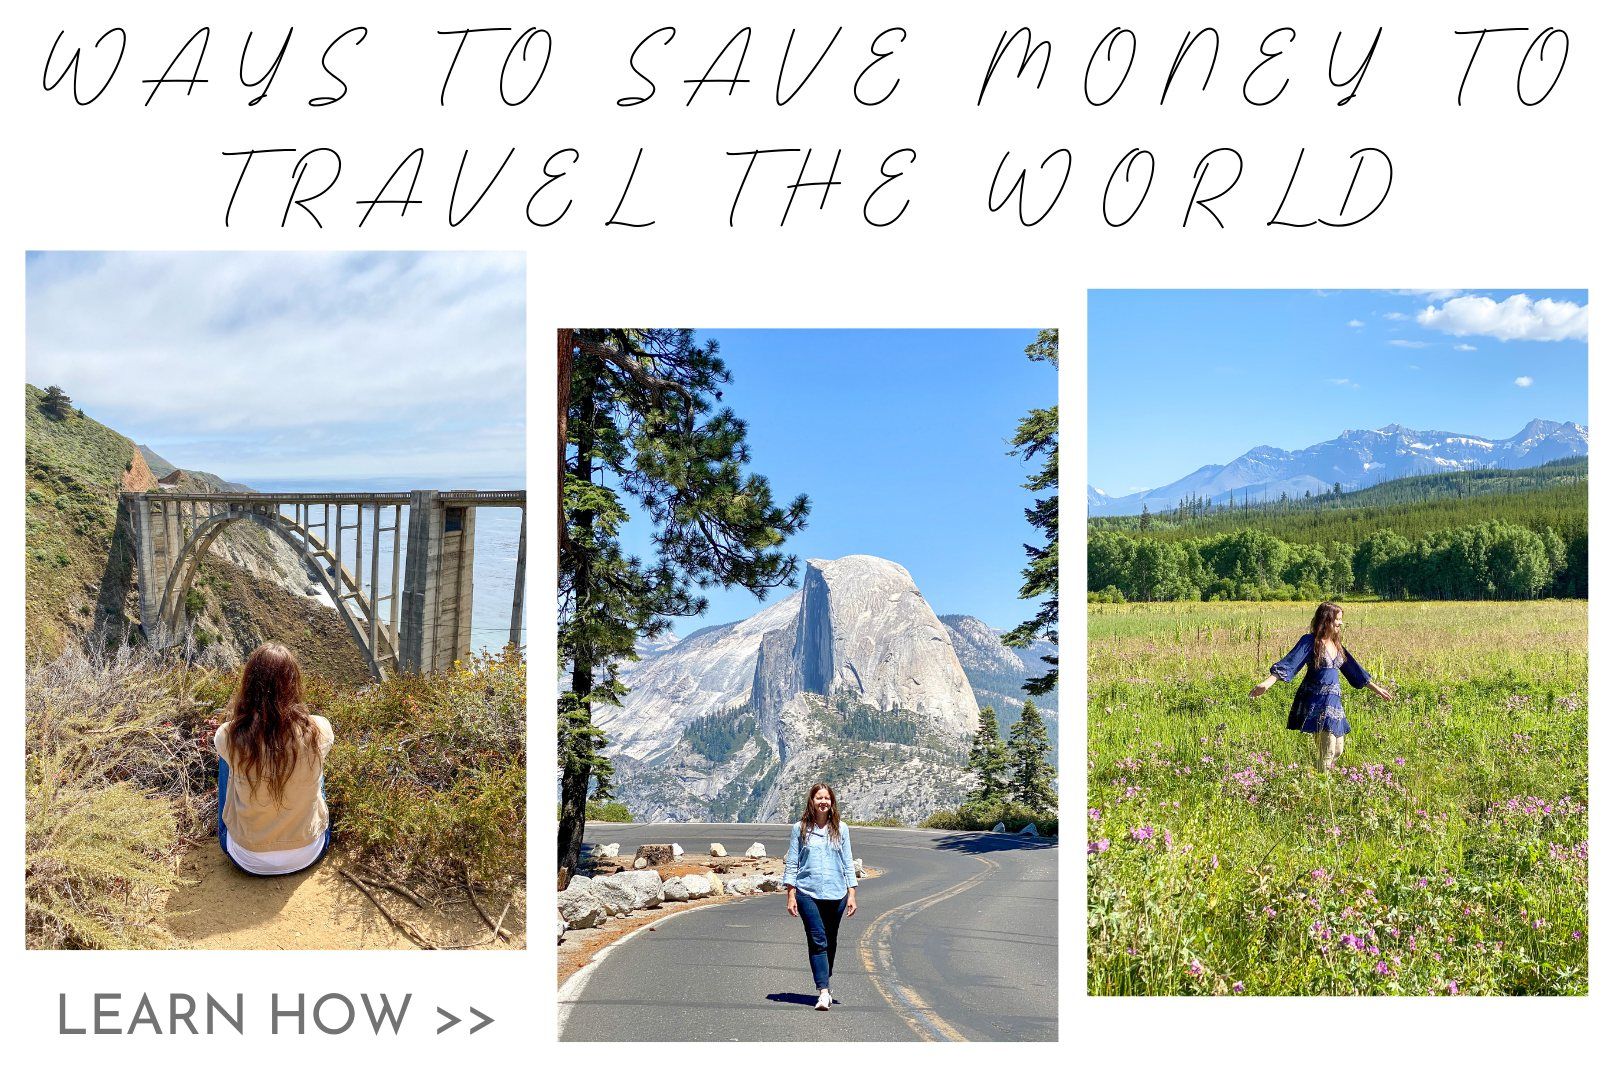 Ways You Can Save Money to Travel